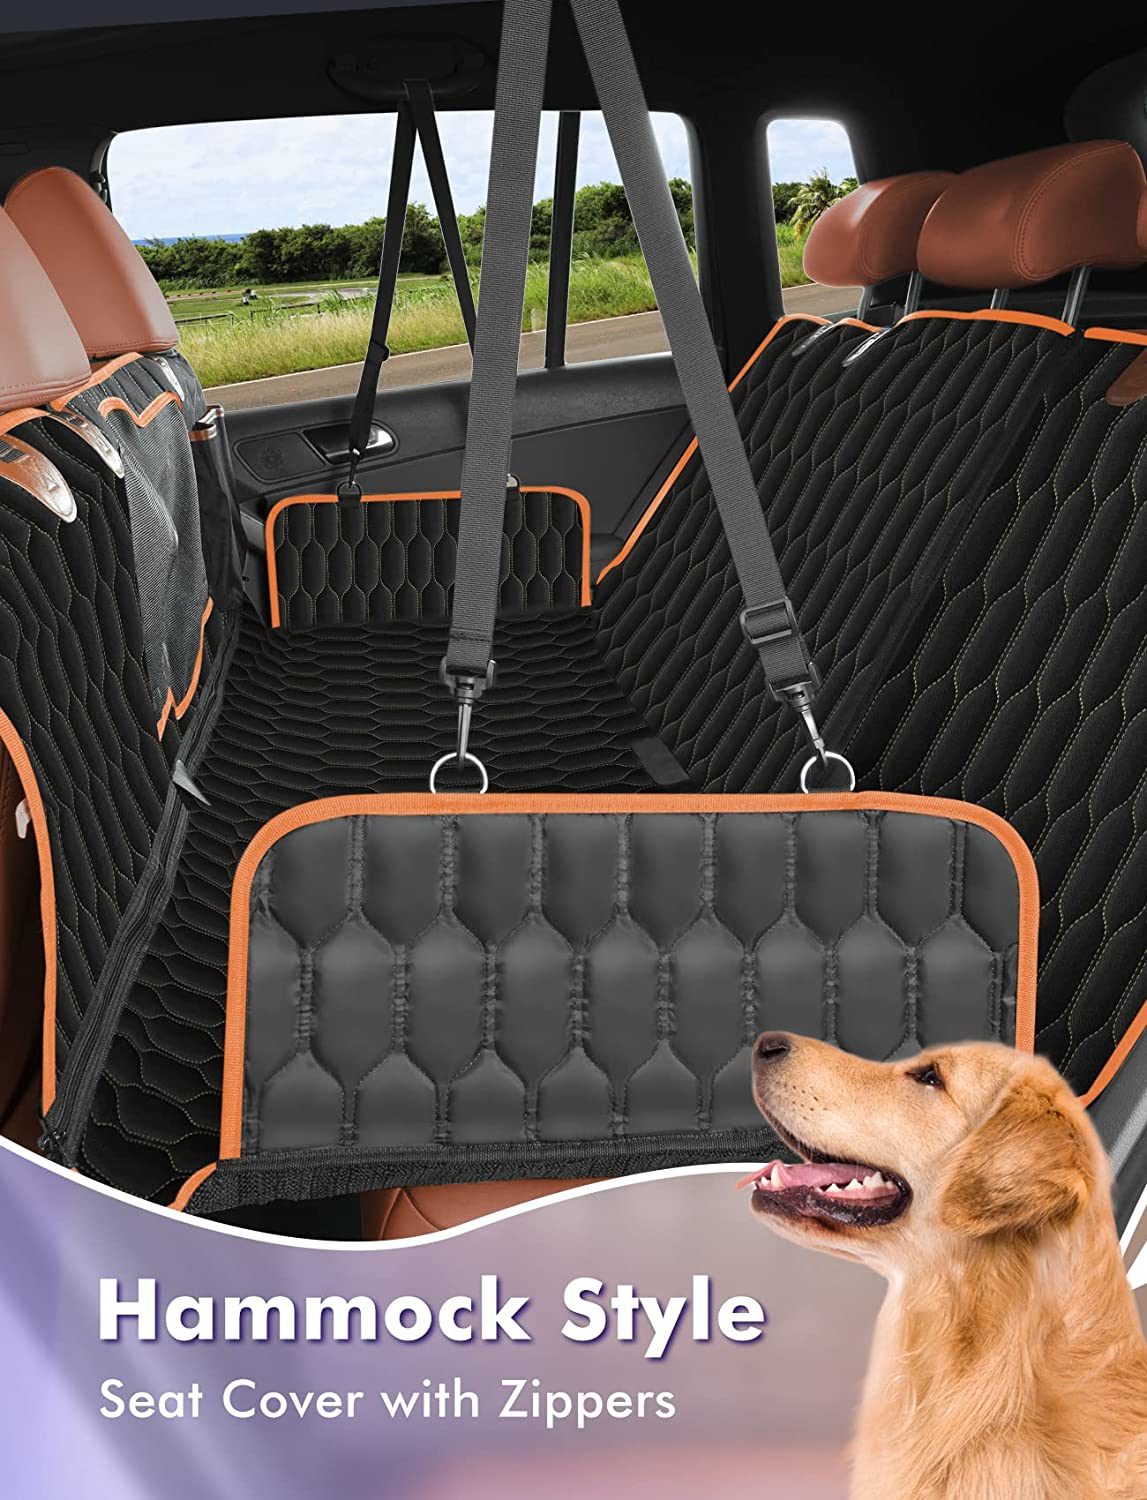 5 In 1 Adjustable Dog Seat Cover